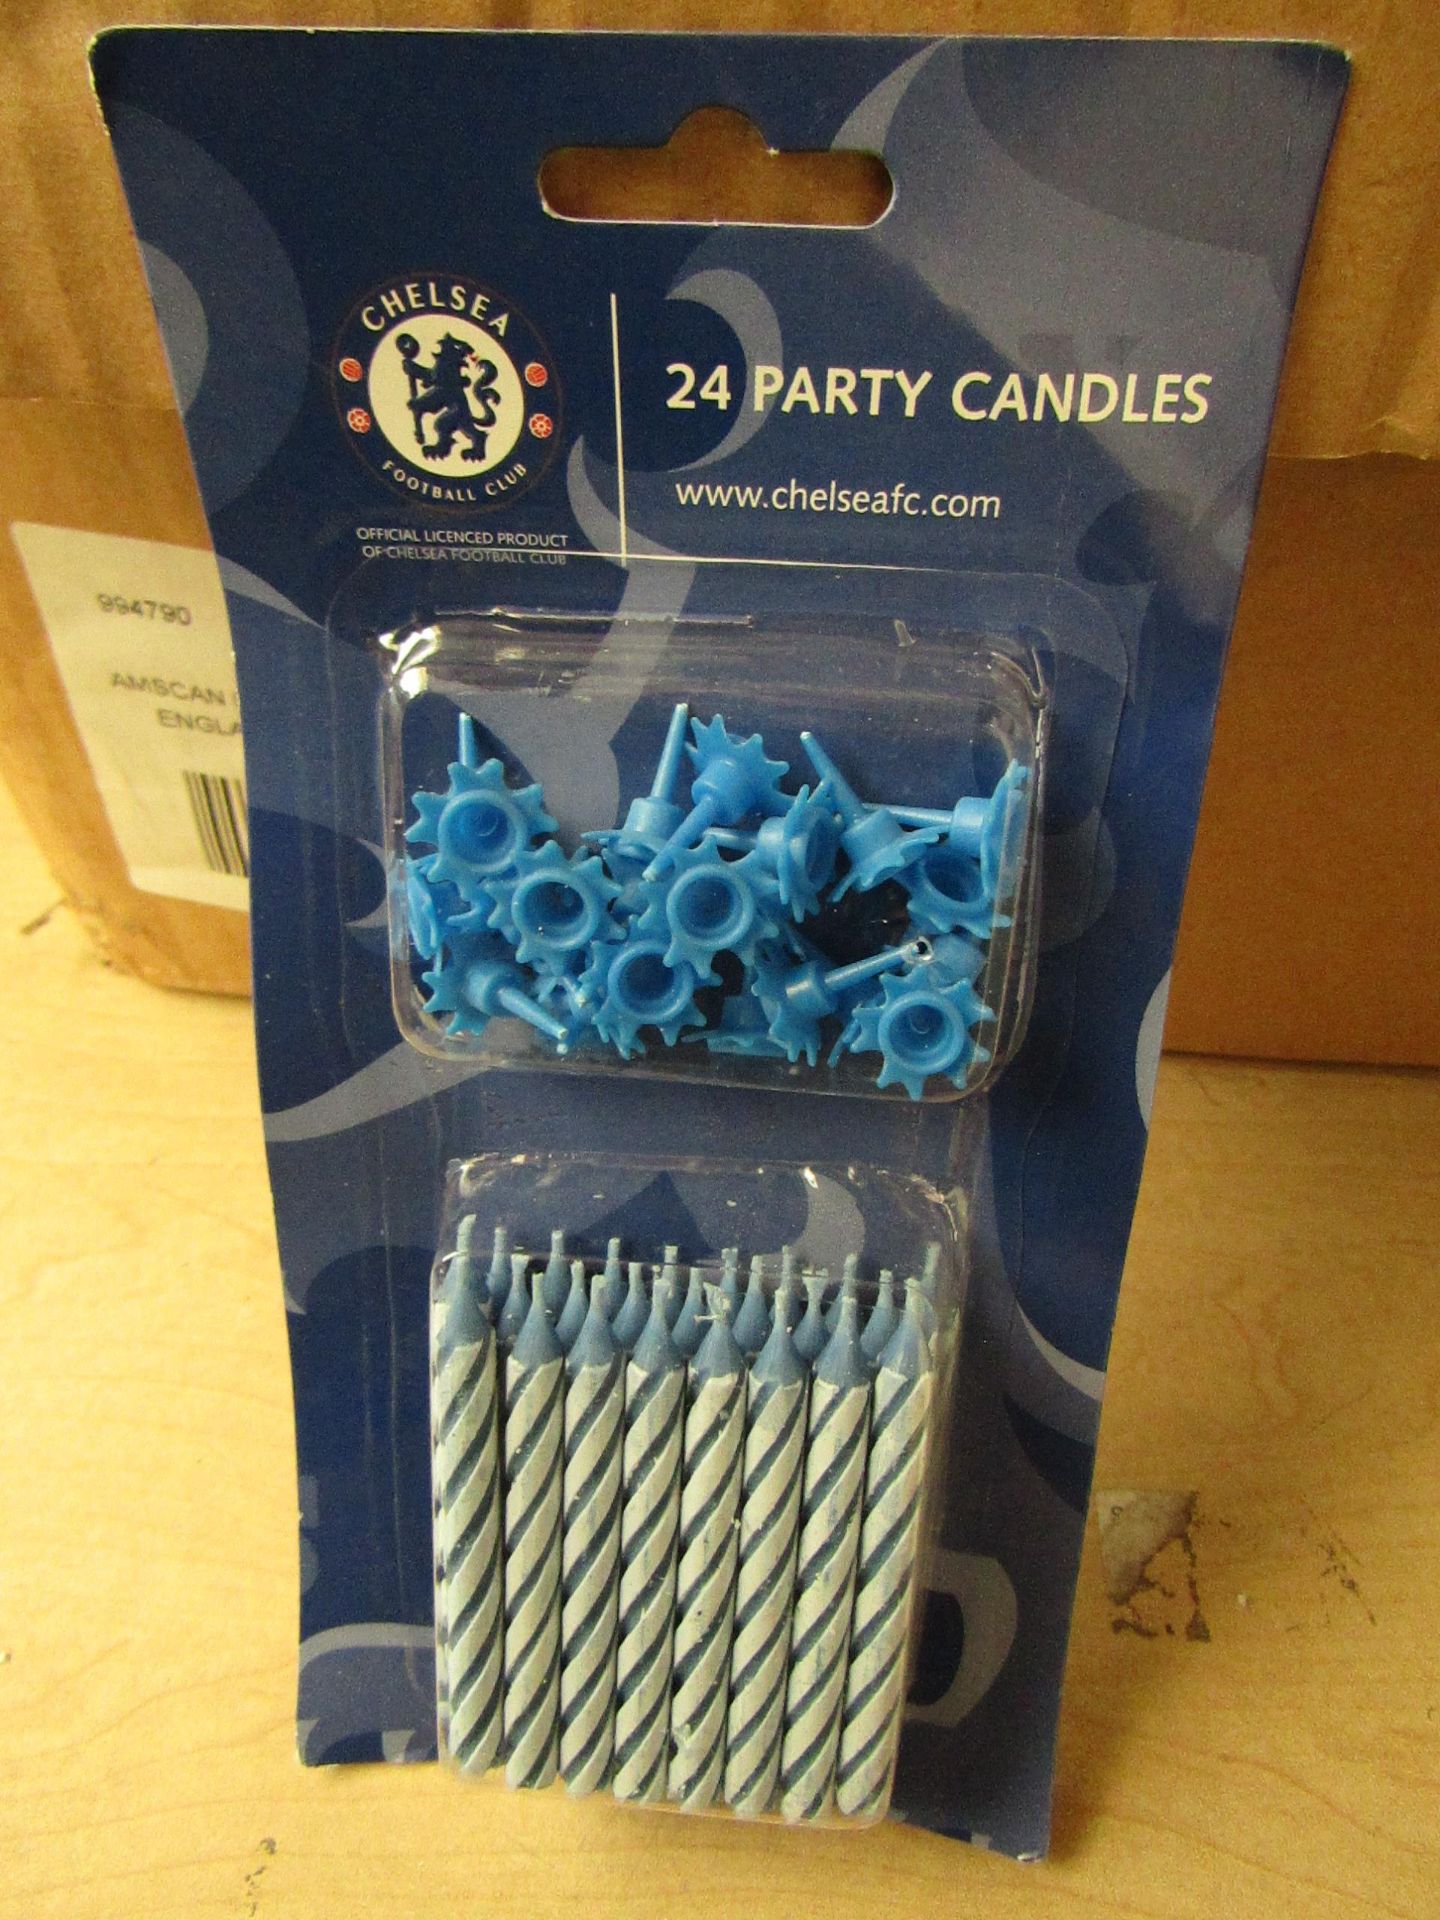 4x Chelsea - 24 Party Candles - New & Packaged.